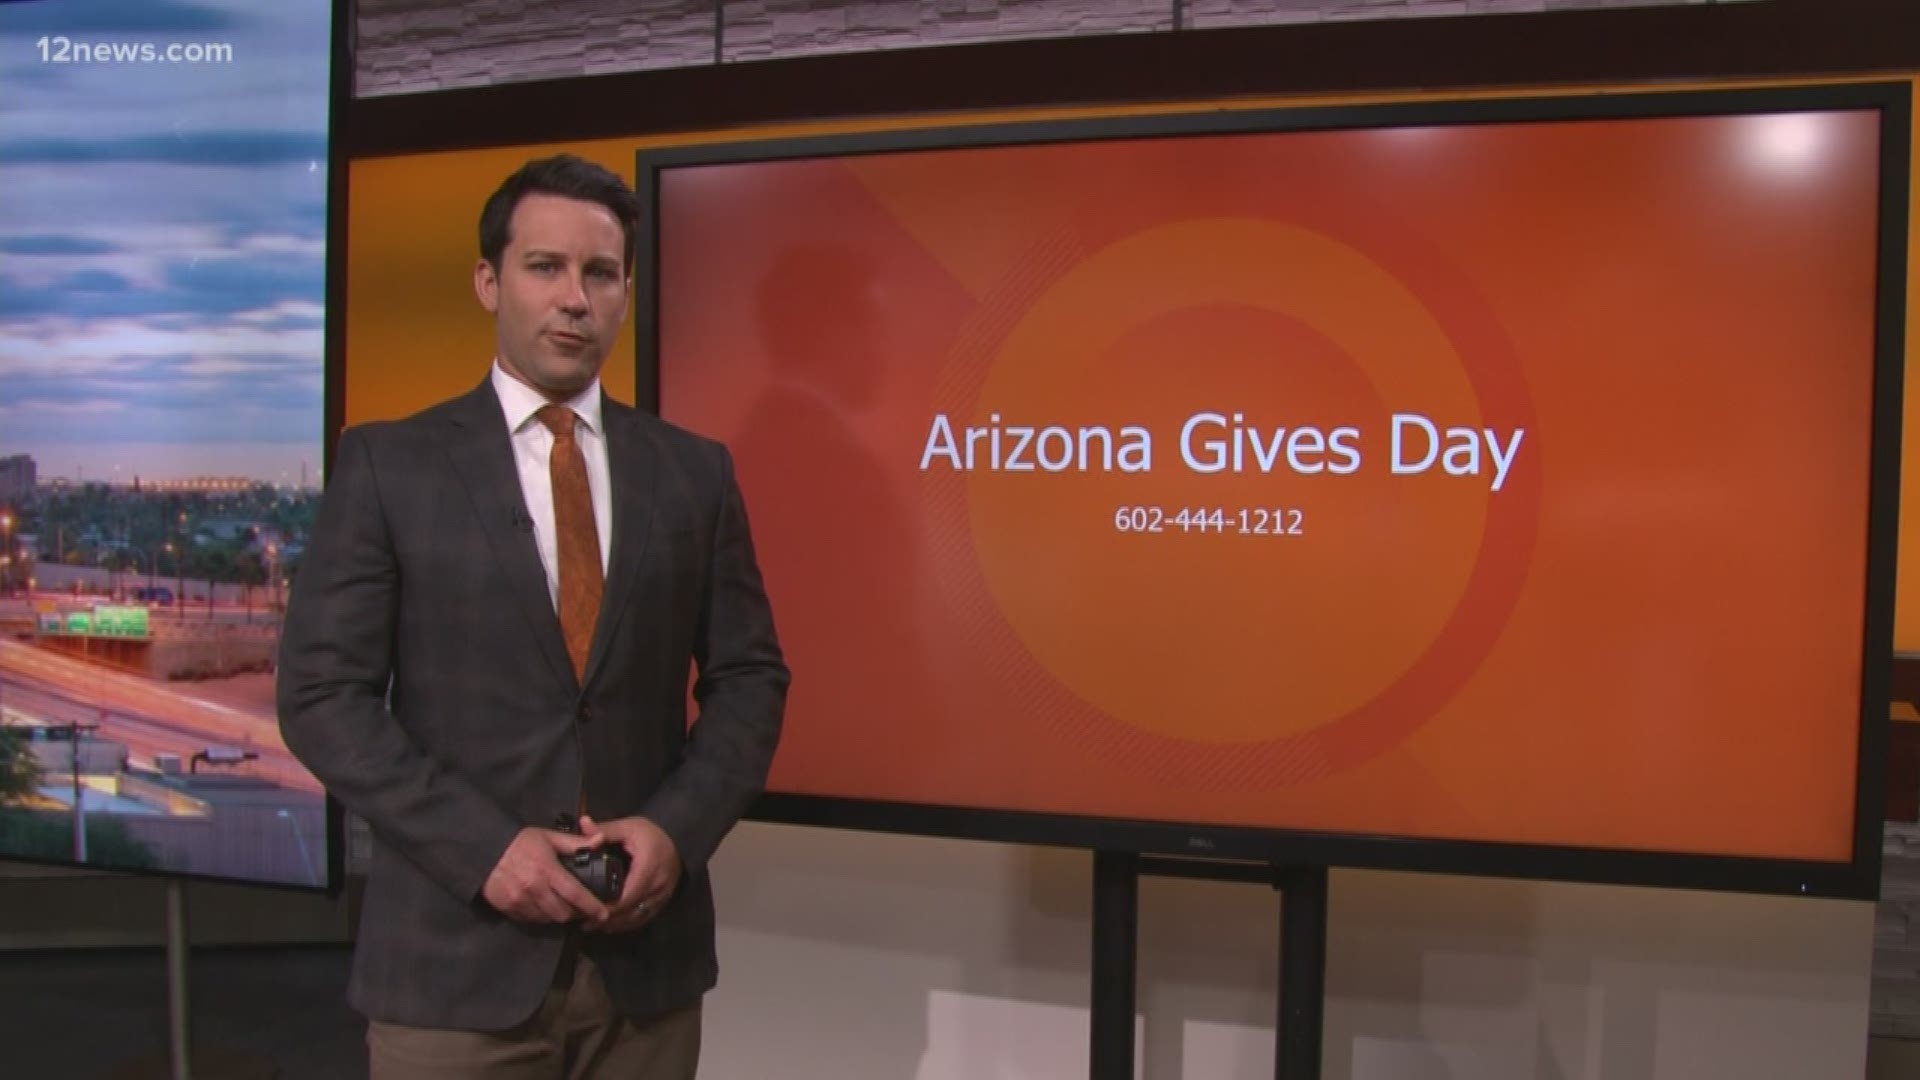 How are you giving back your community on #ArizonaGivesDay? Team 12's Ryan Cody is reading your answers.